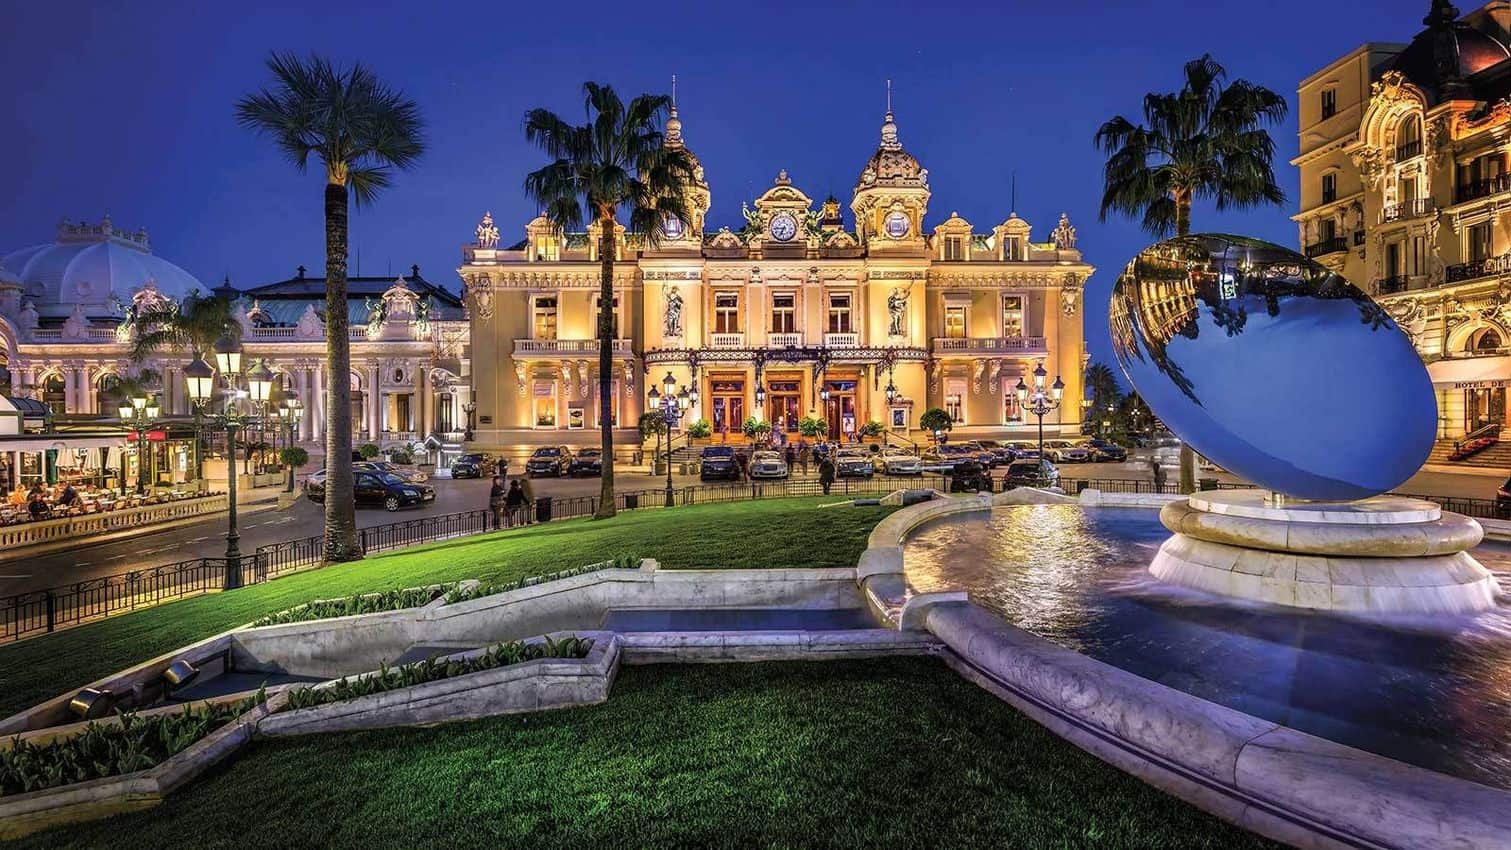 The Monte-Carlo Casino was built in 1863, Charles Garnier built the Monte-Carlo Opera House inside the Casino in 1878 which was inaugurated by Sarah Bernhardt in 1879.